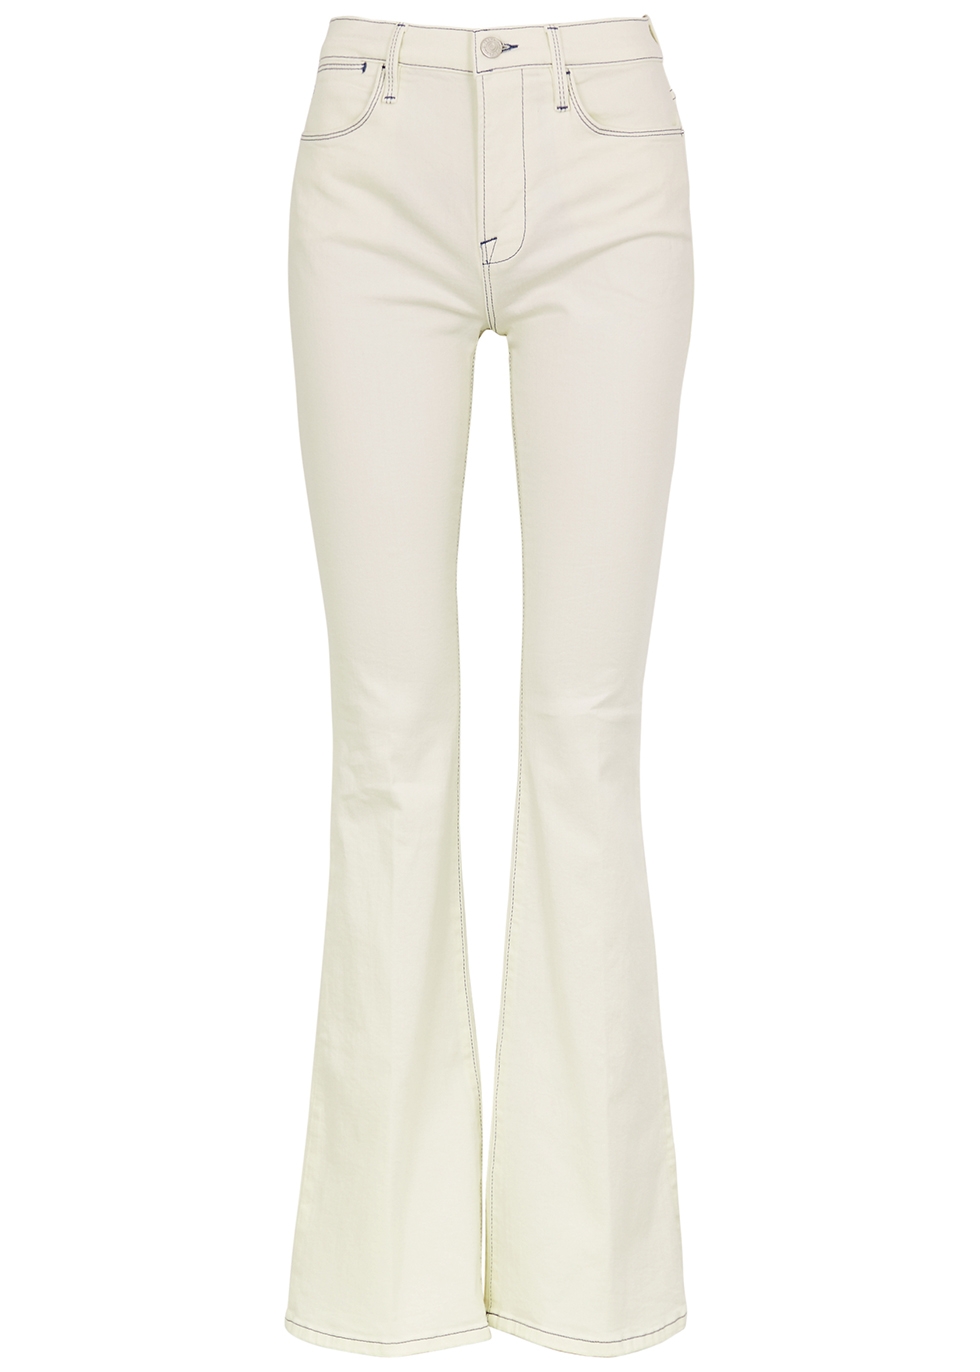 Le High Flare off-white jeans